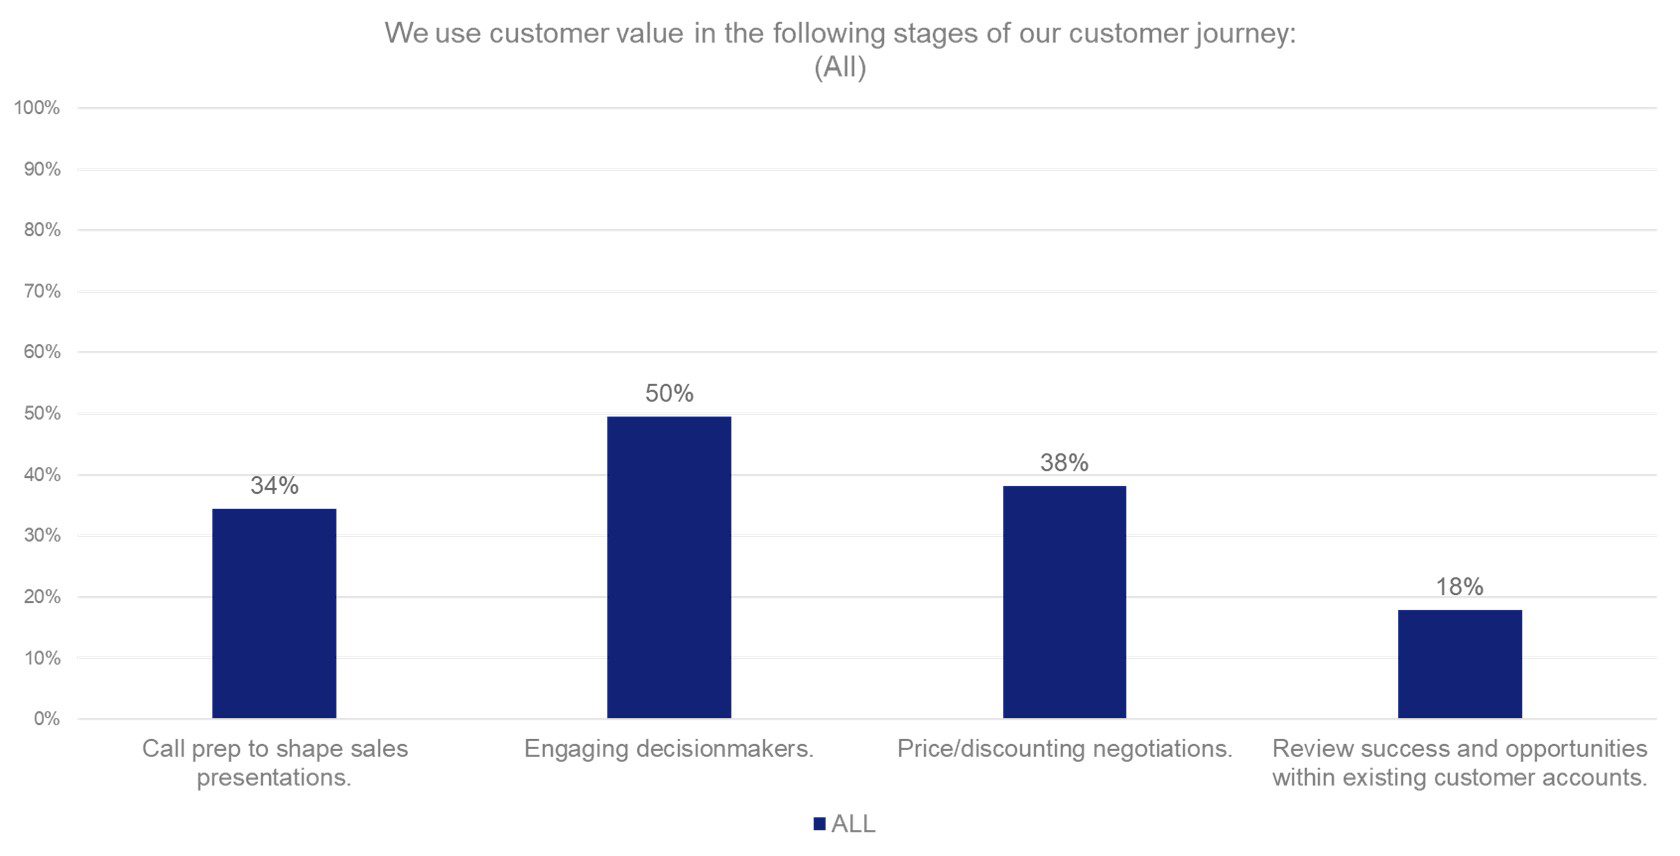 Customer Value Usage by Buying Stage